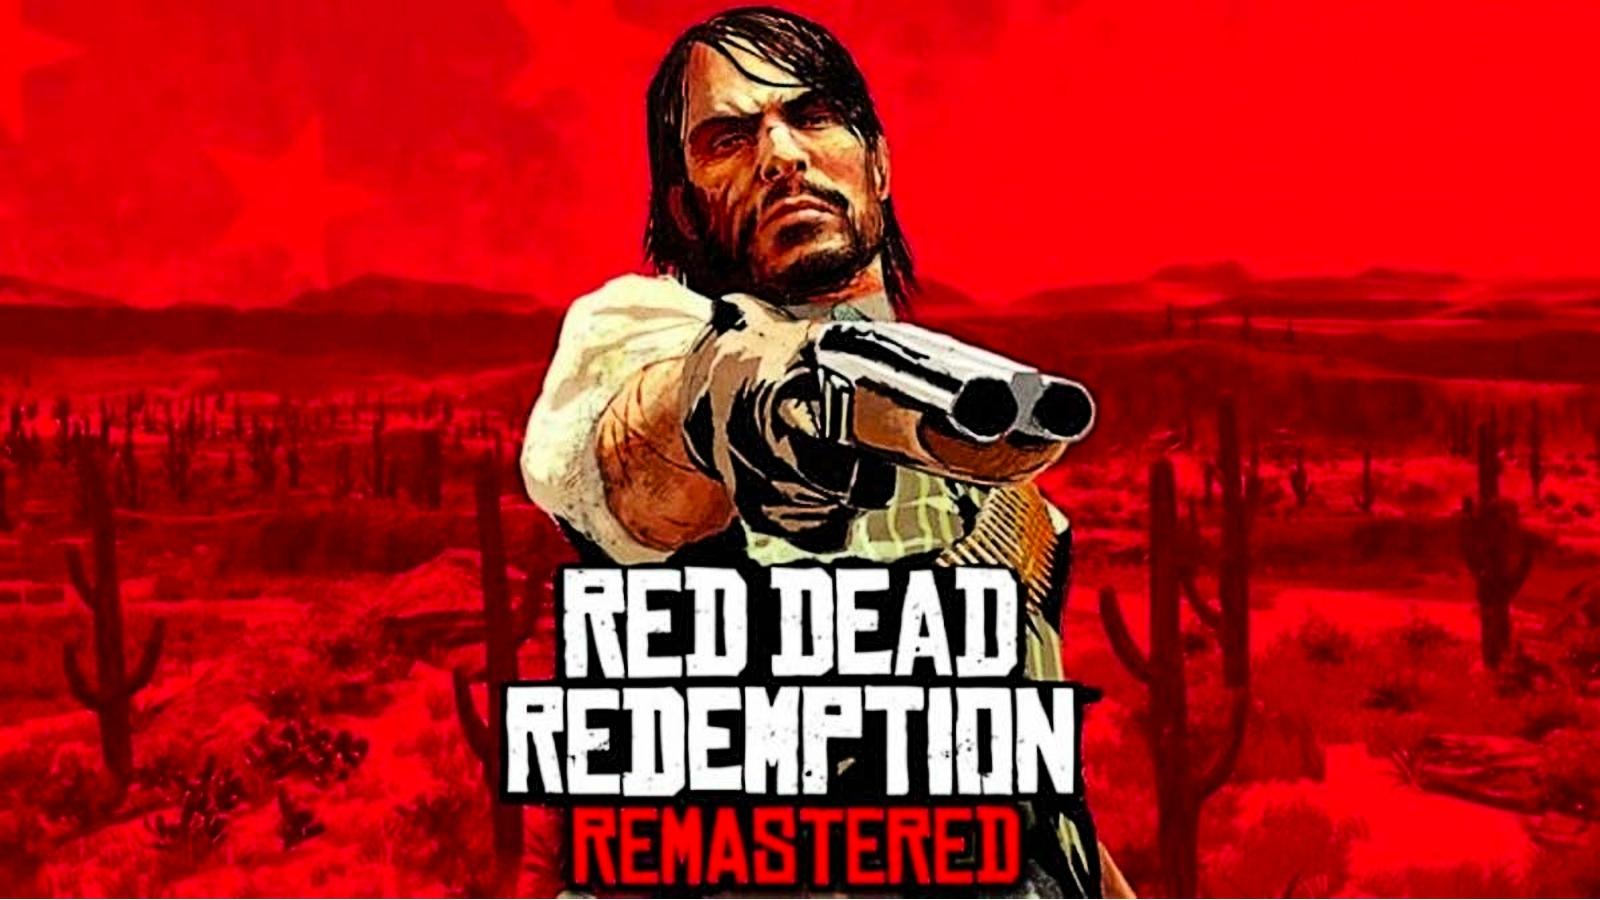 Merchandiser pedal amplitude Red Dead Redemption Remastered rumors: Leaks & everything we know - Dexerto